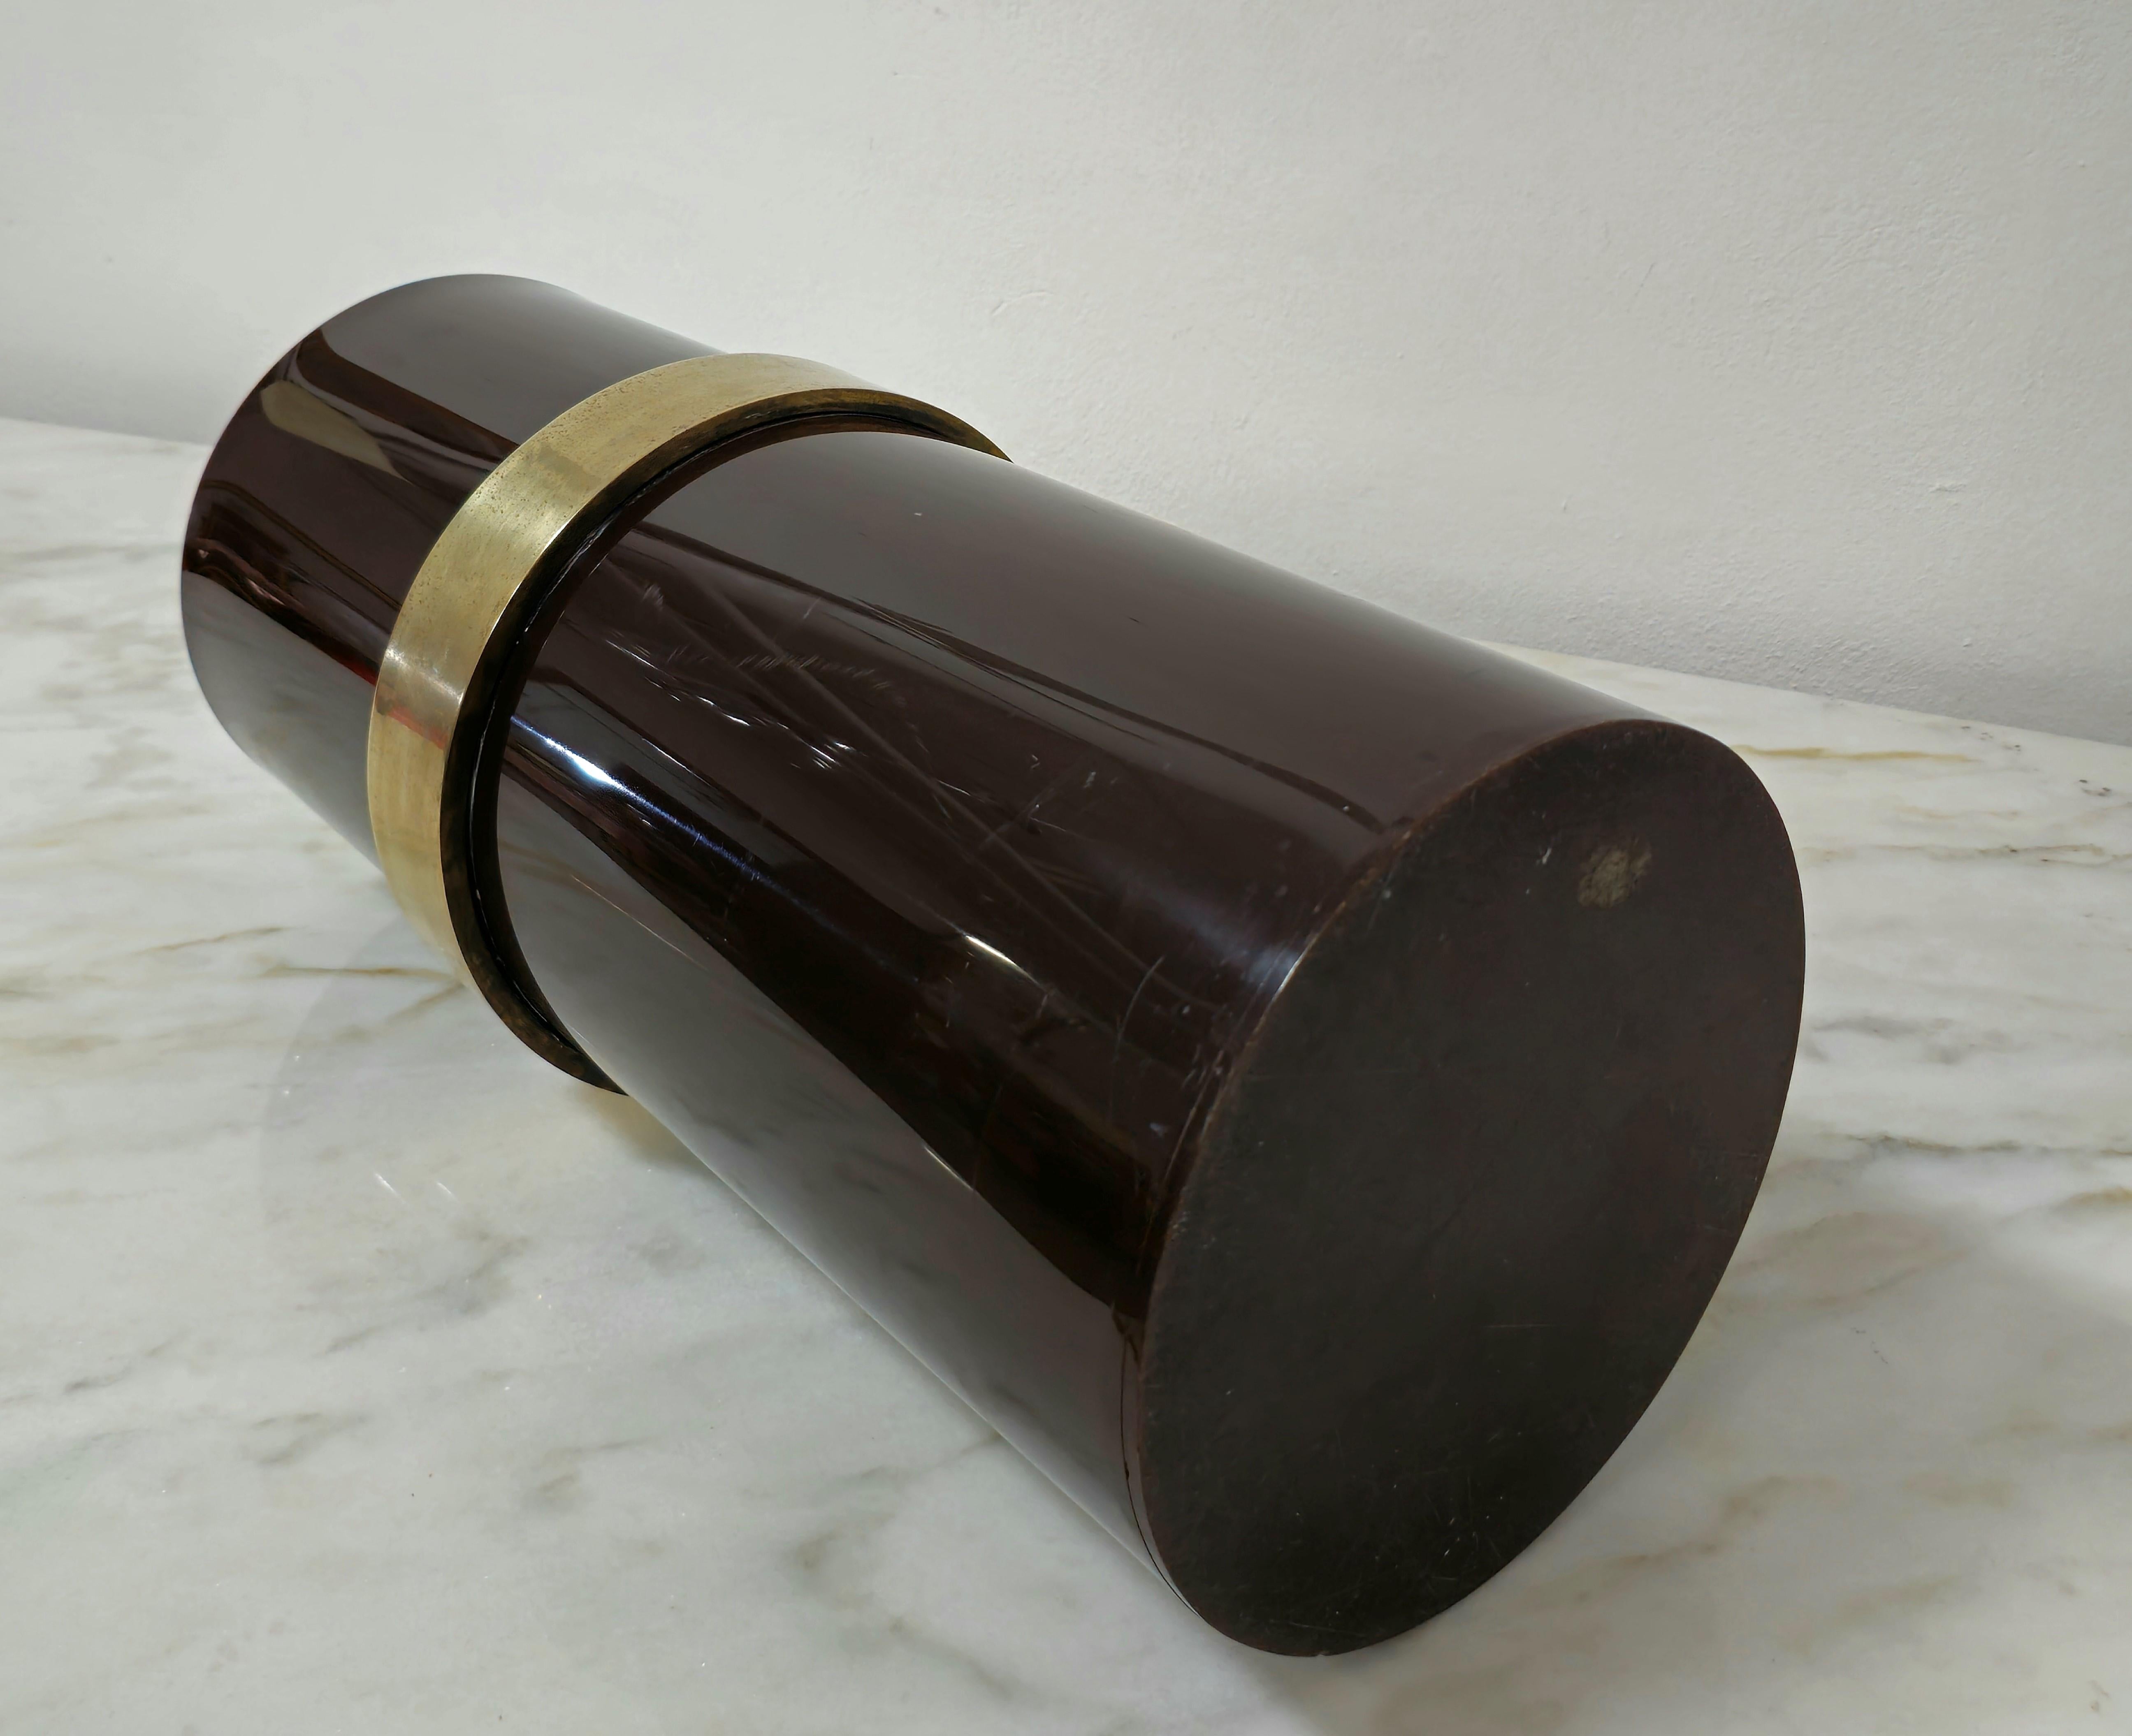 Midcentury Umbrella Stand Brown Plastic Brass Cylindrical Italian Design 1970s For Sale 4